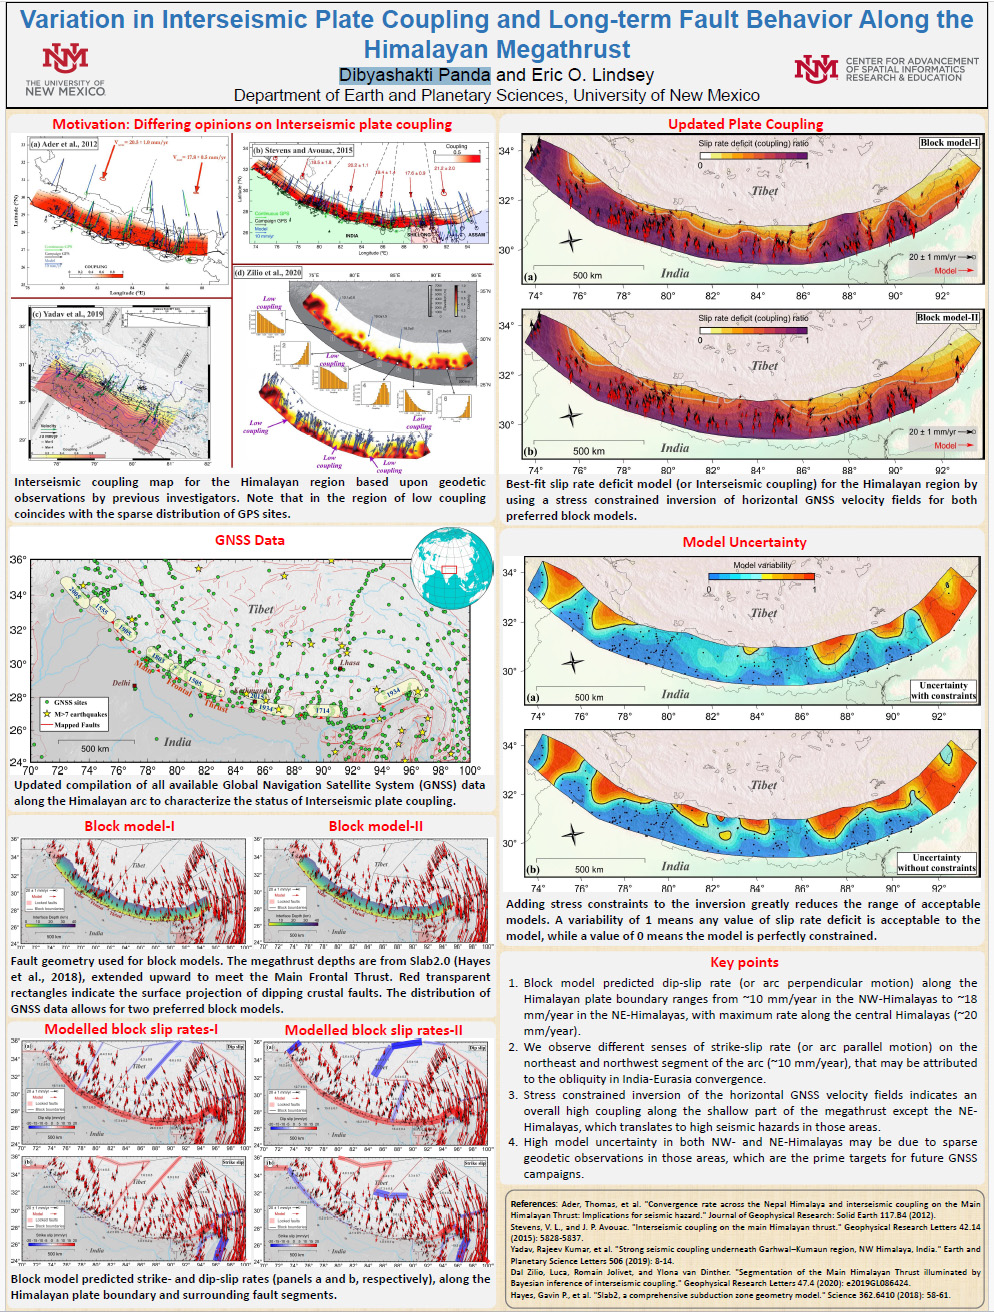 Variation in Interseismic Plate Coupling and Long-term Fault Behavior